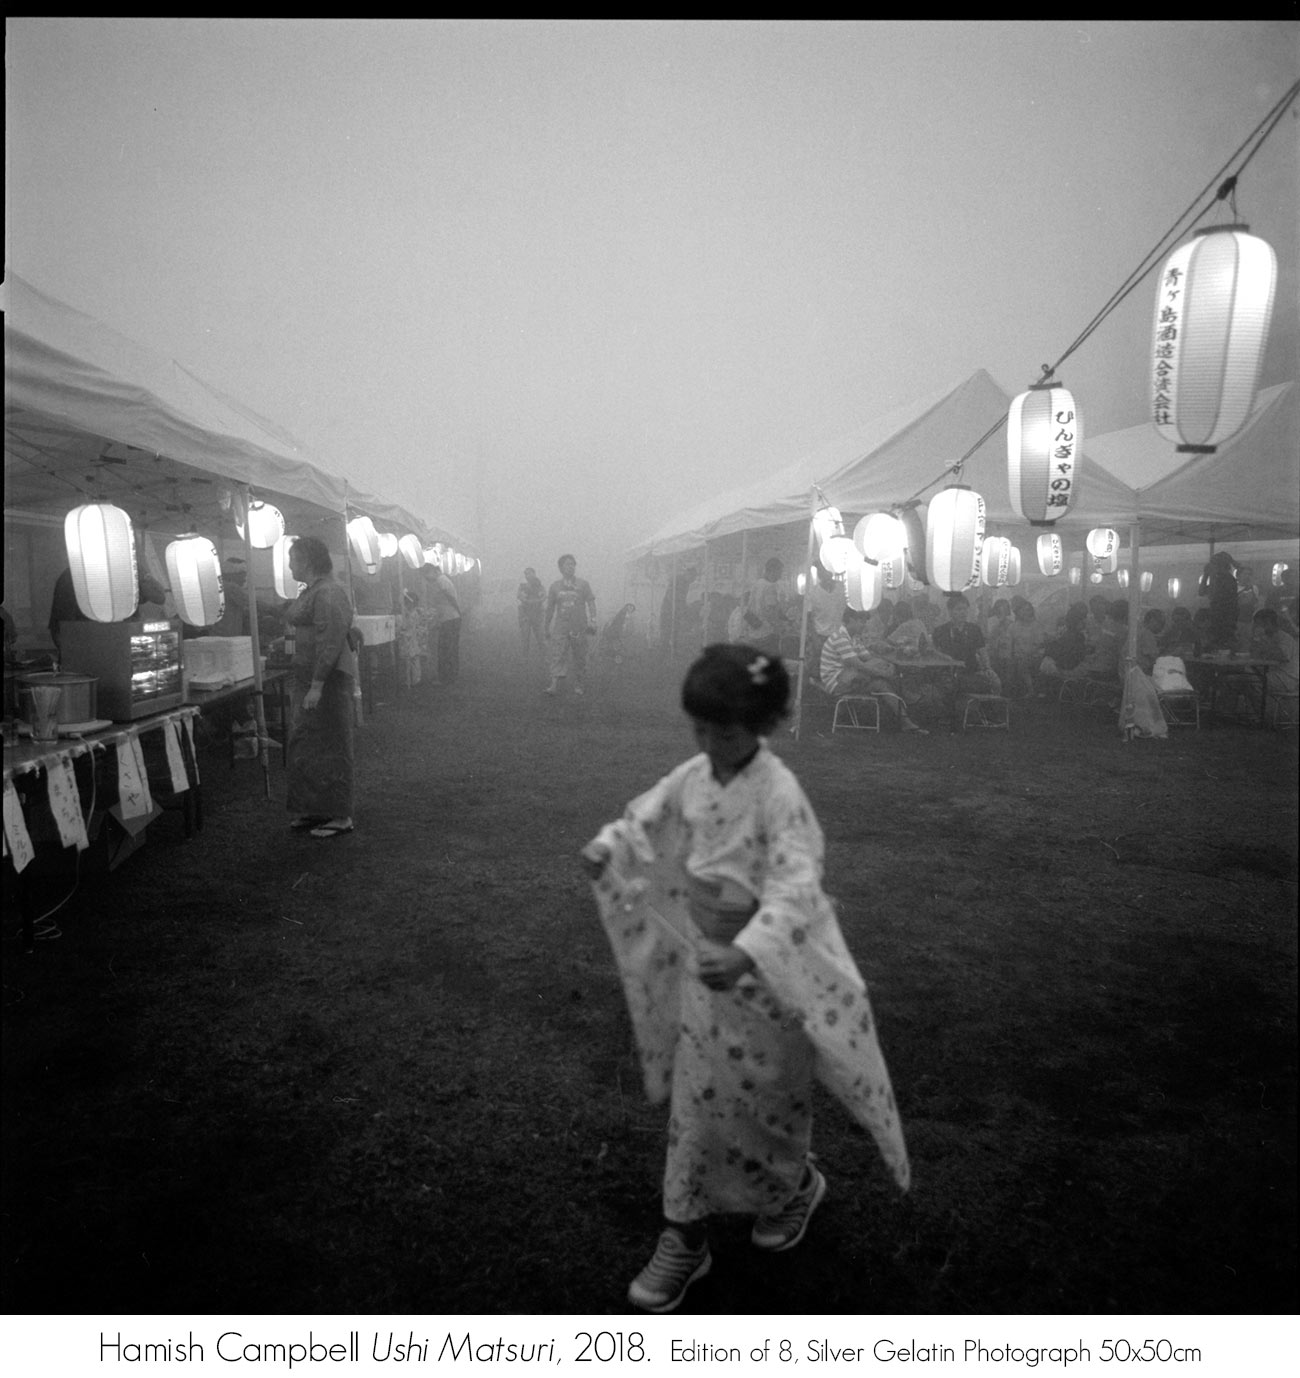 Hamish Campbell: Aogashima - life among the twin calderas. Head On Photo Festival 2018 Exhibition. Artsite Galleries, Sydney 05 - 27 May 2018.